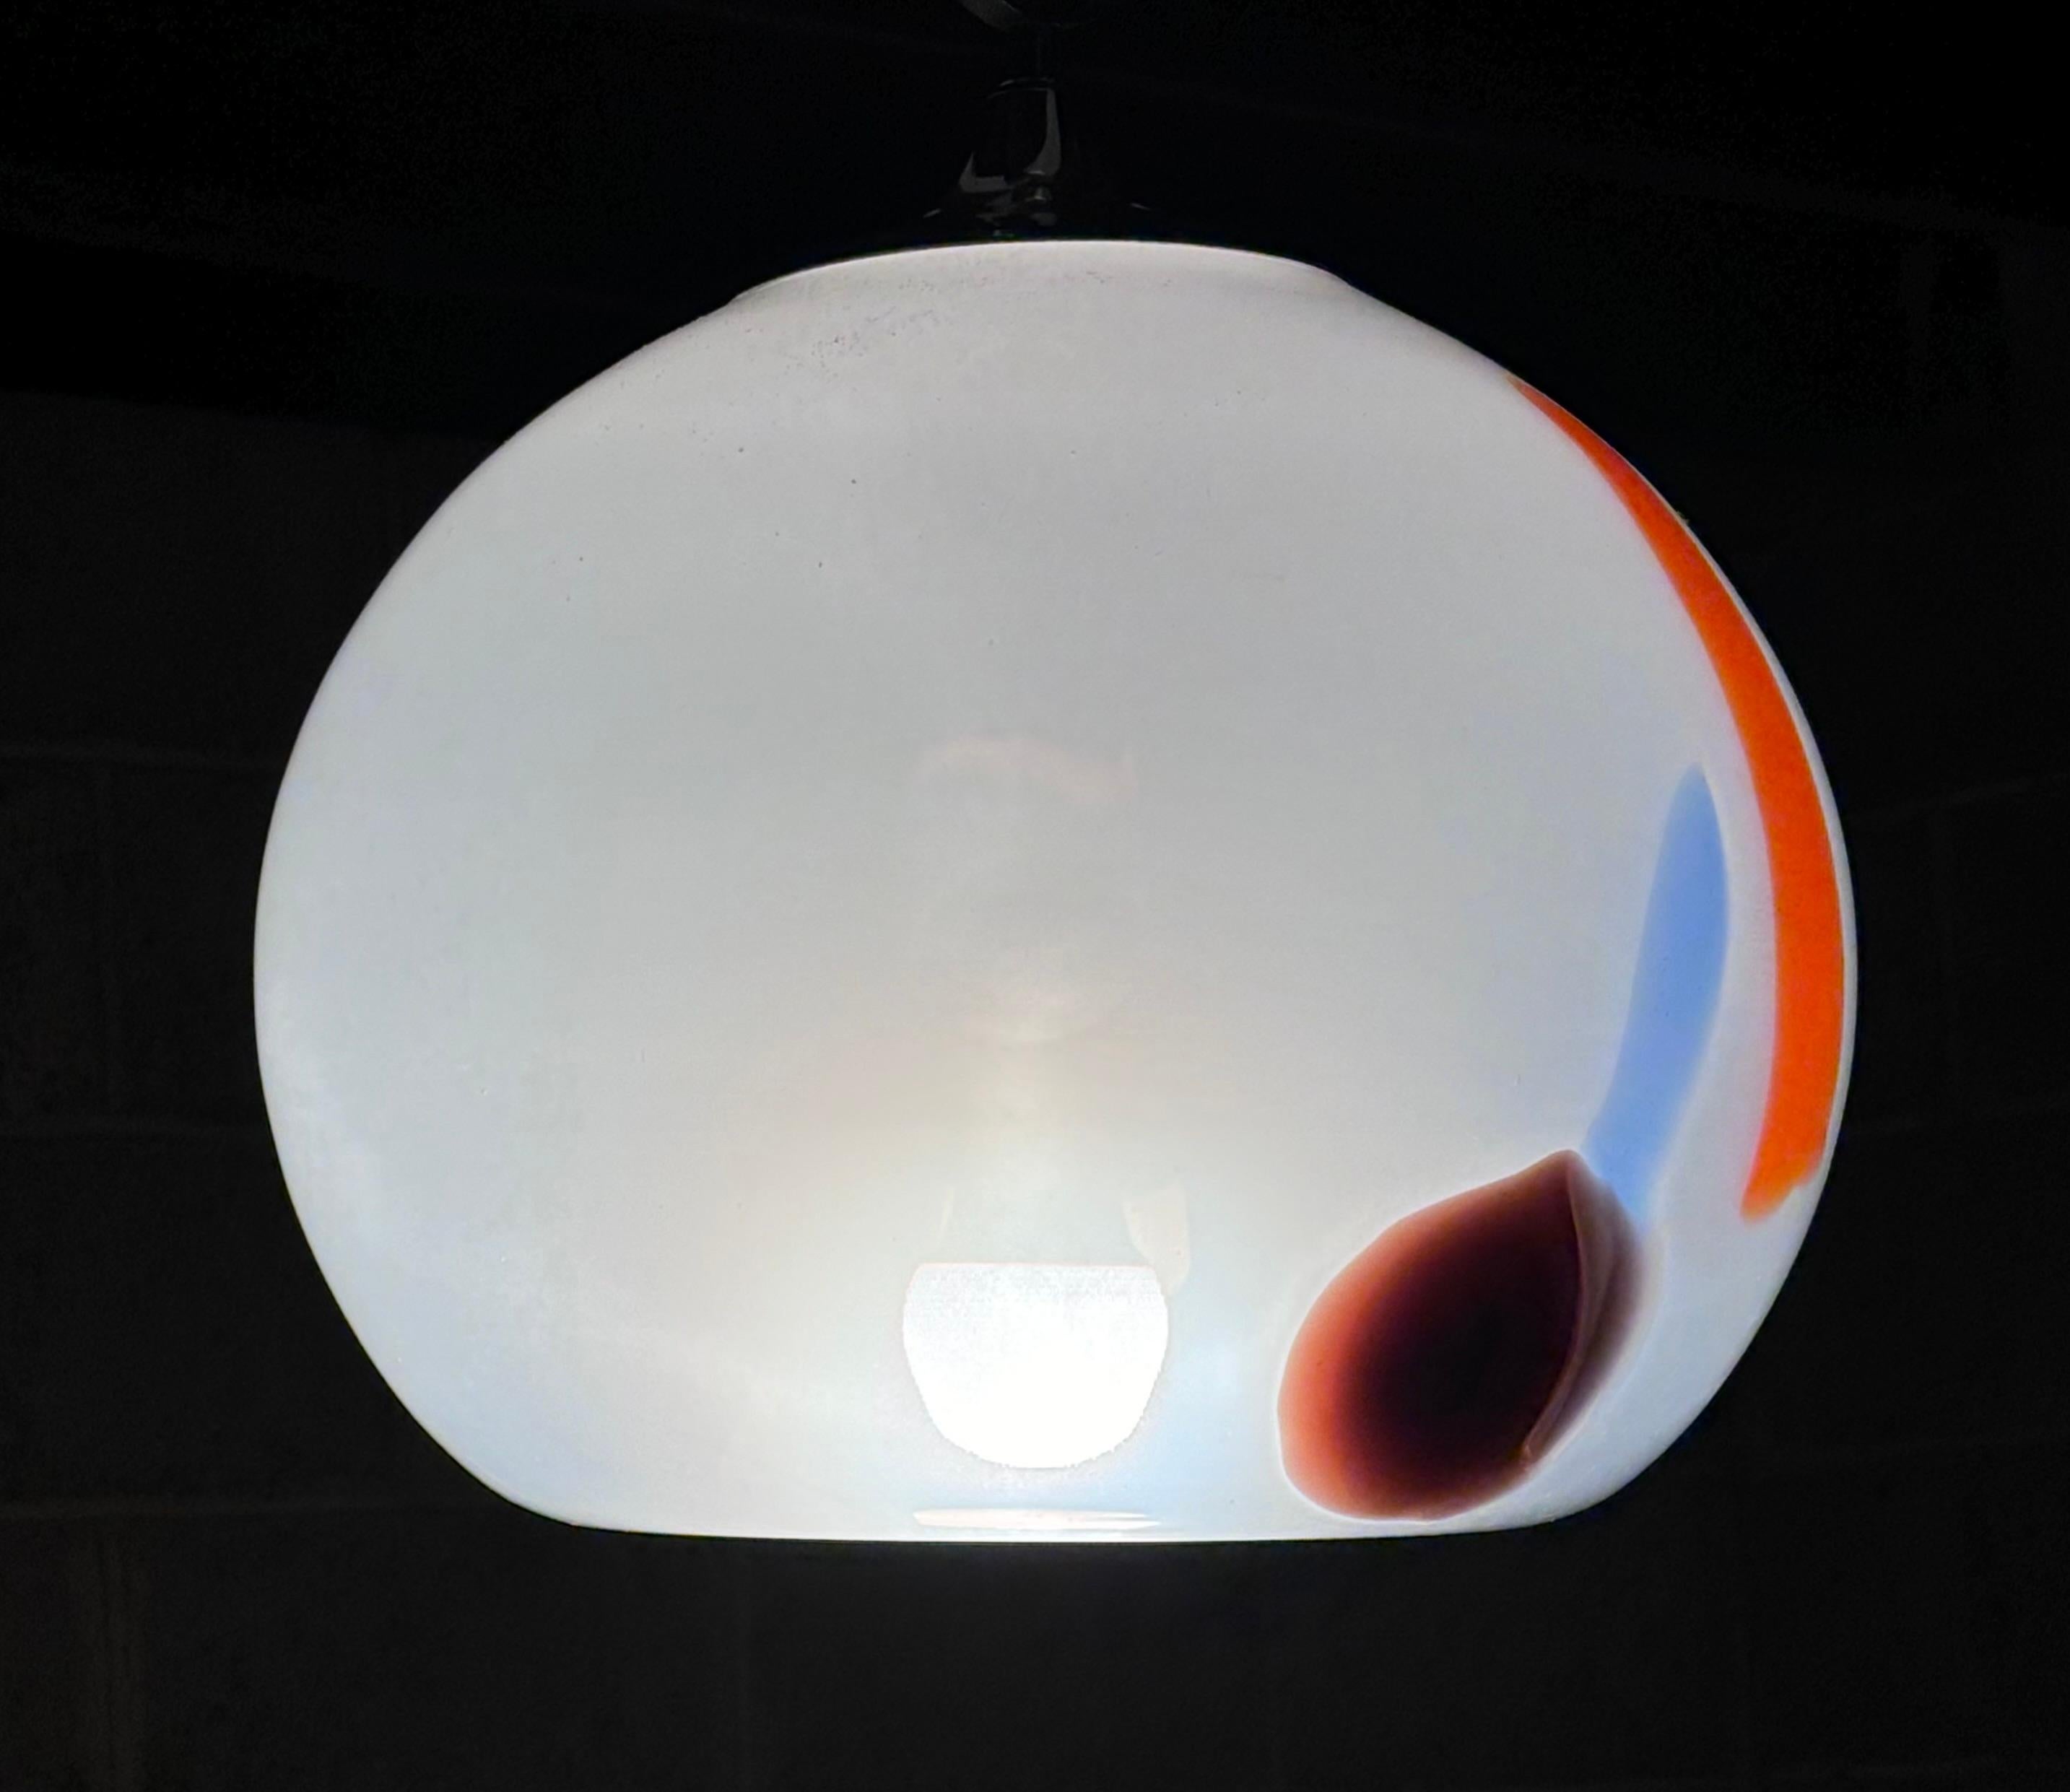 Drop-dead gorgeous Murano pendant light attributed to Carlo Nason for Mazzega. Features a double-walled lamp body accented with splashes of color in the 